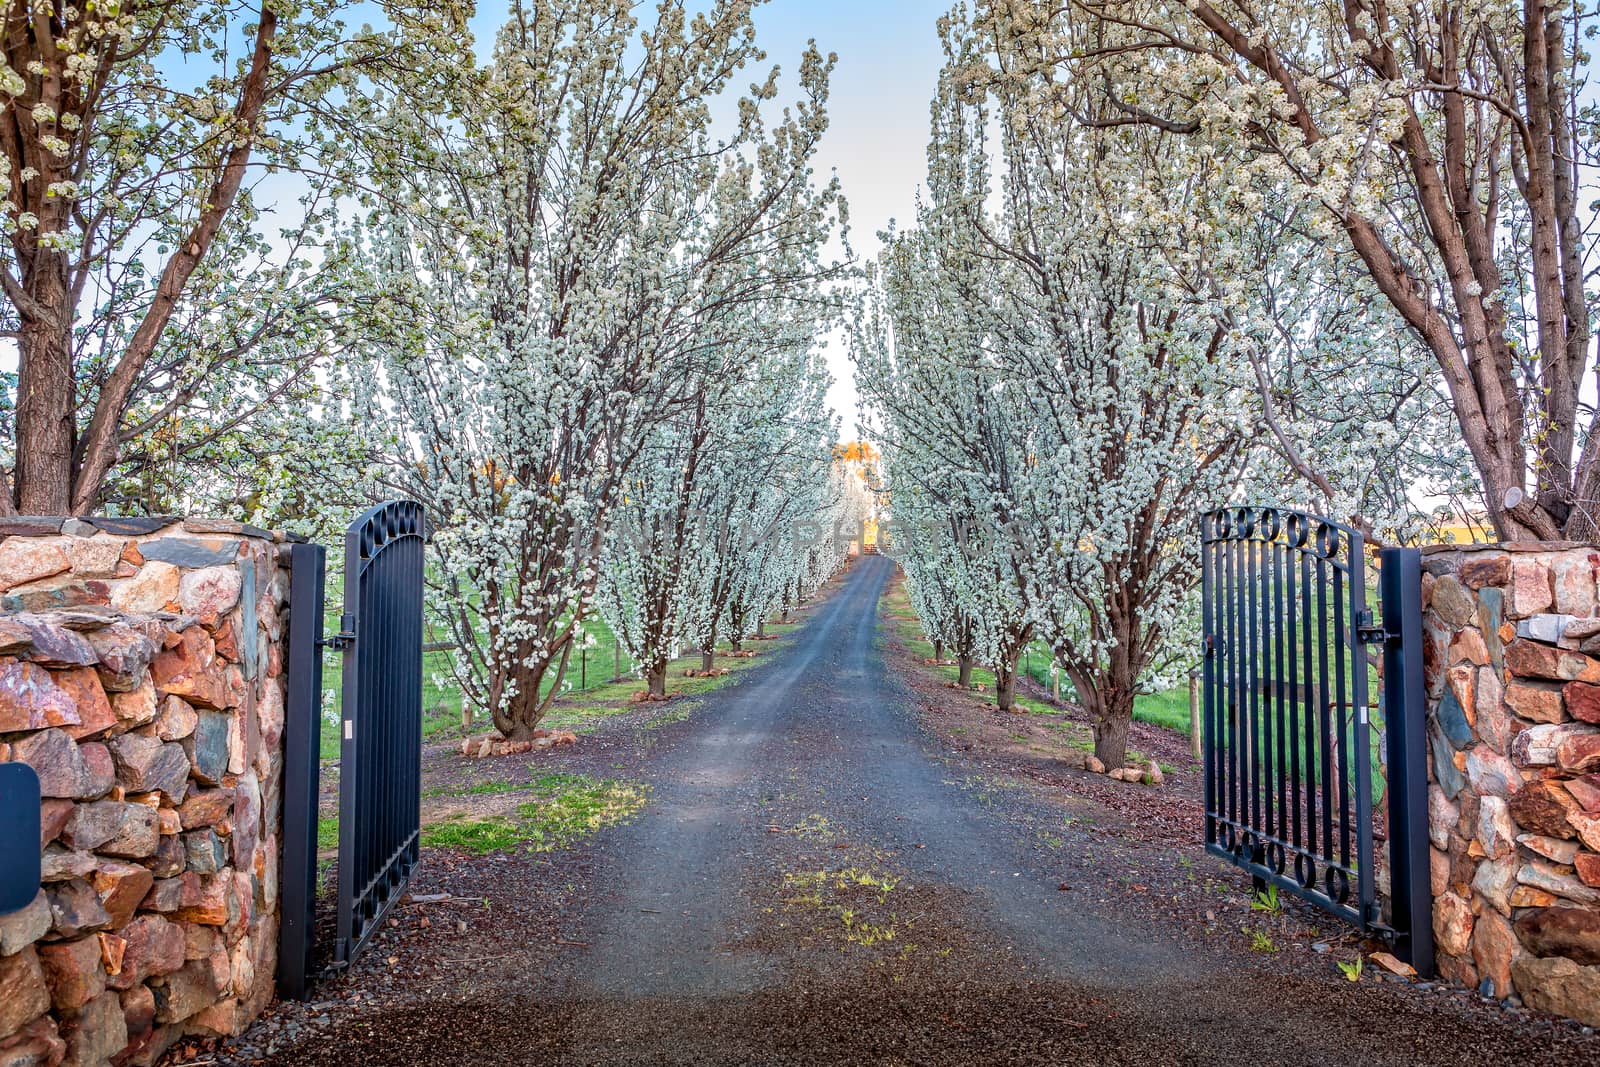 Entrance of tree lined drive way in full flower by lovleah